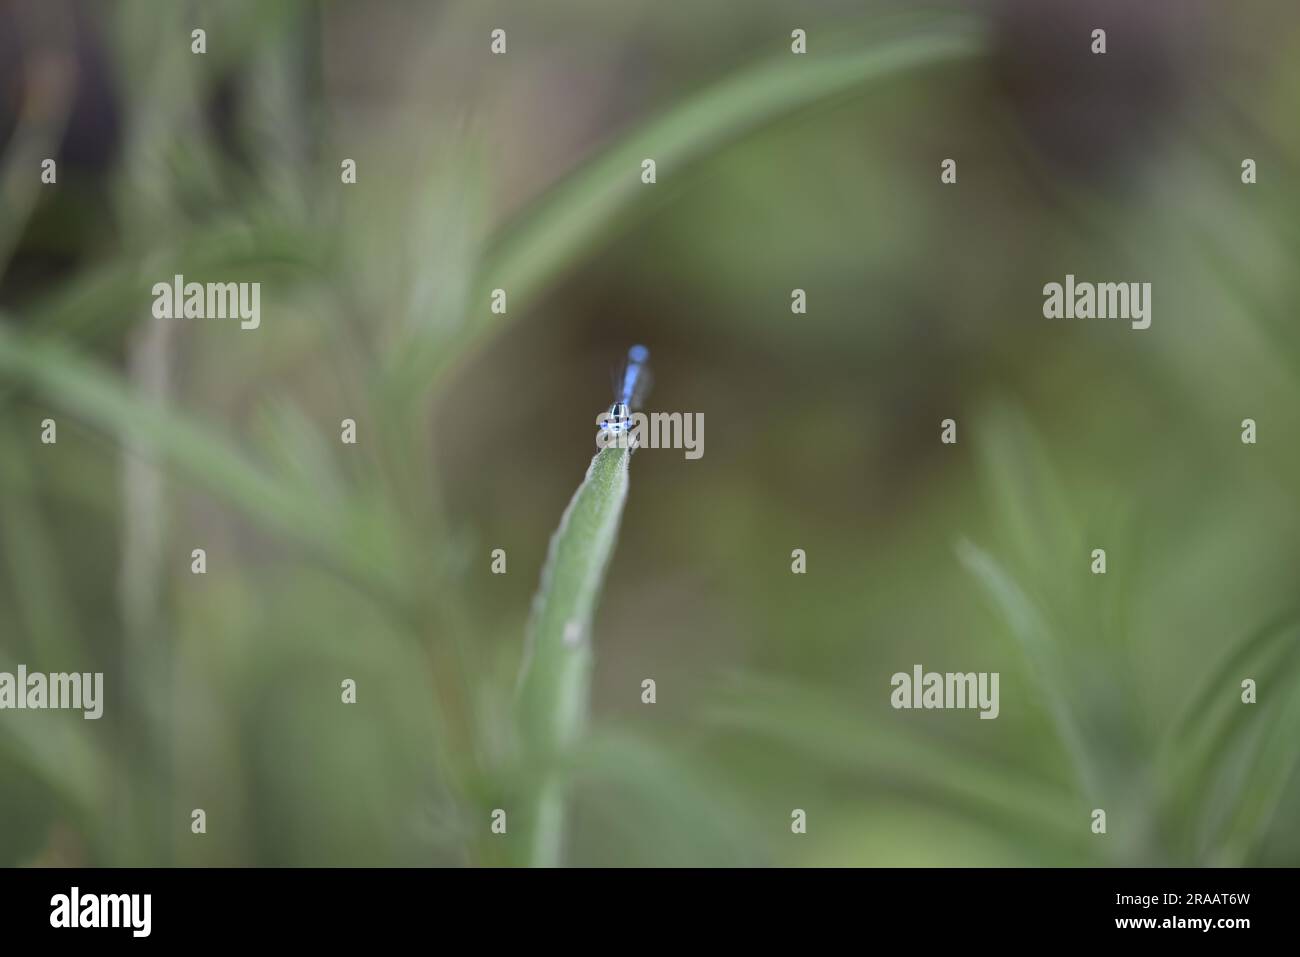 Male Azure Damselfly (Caenagrion puella) Facing Camera from a Single Blade of Grass, Centre of Image, against a Green Background taken in June in UK Stock Photo